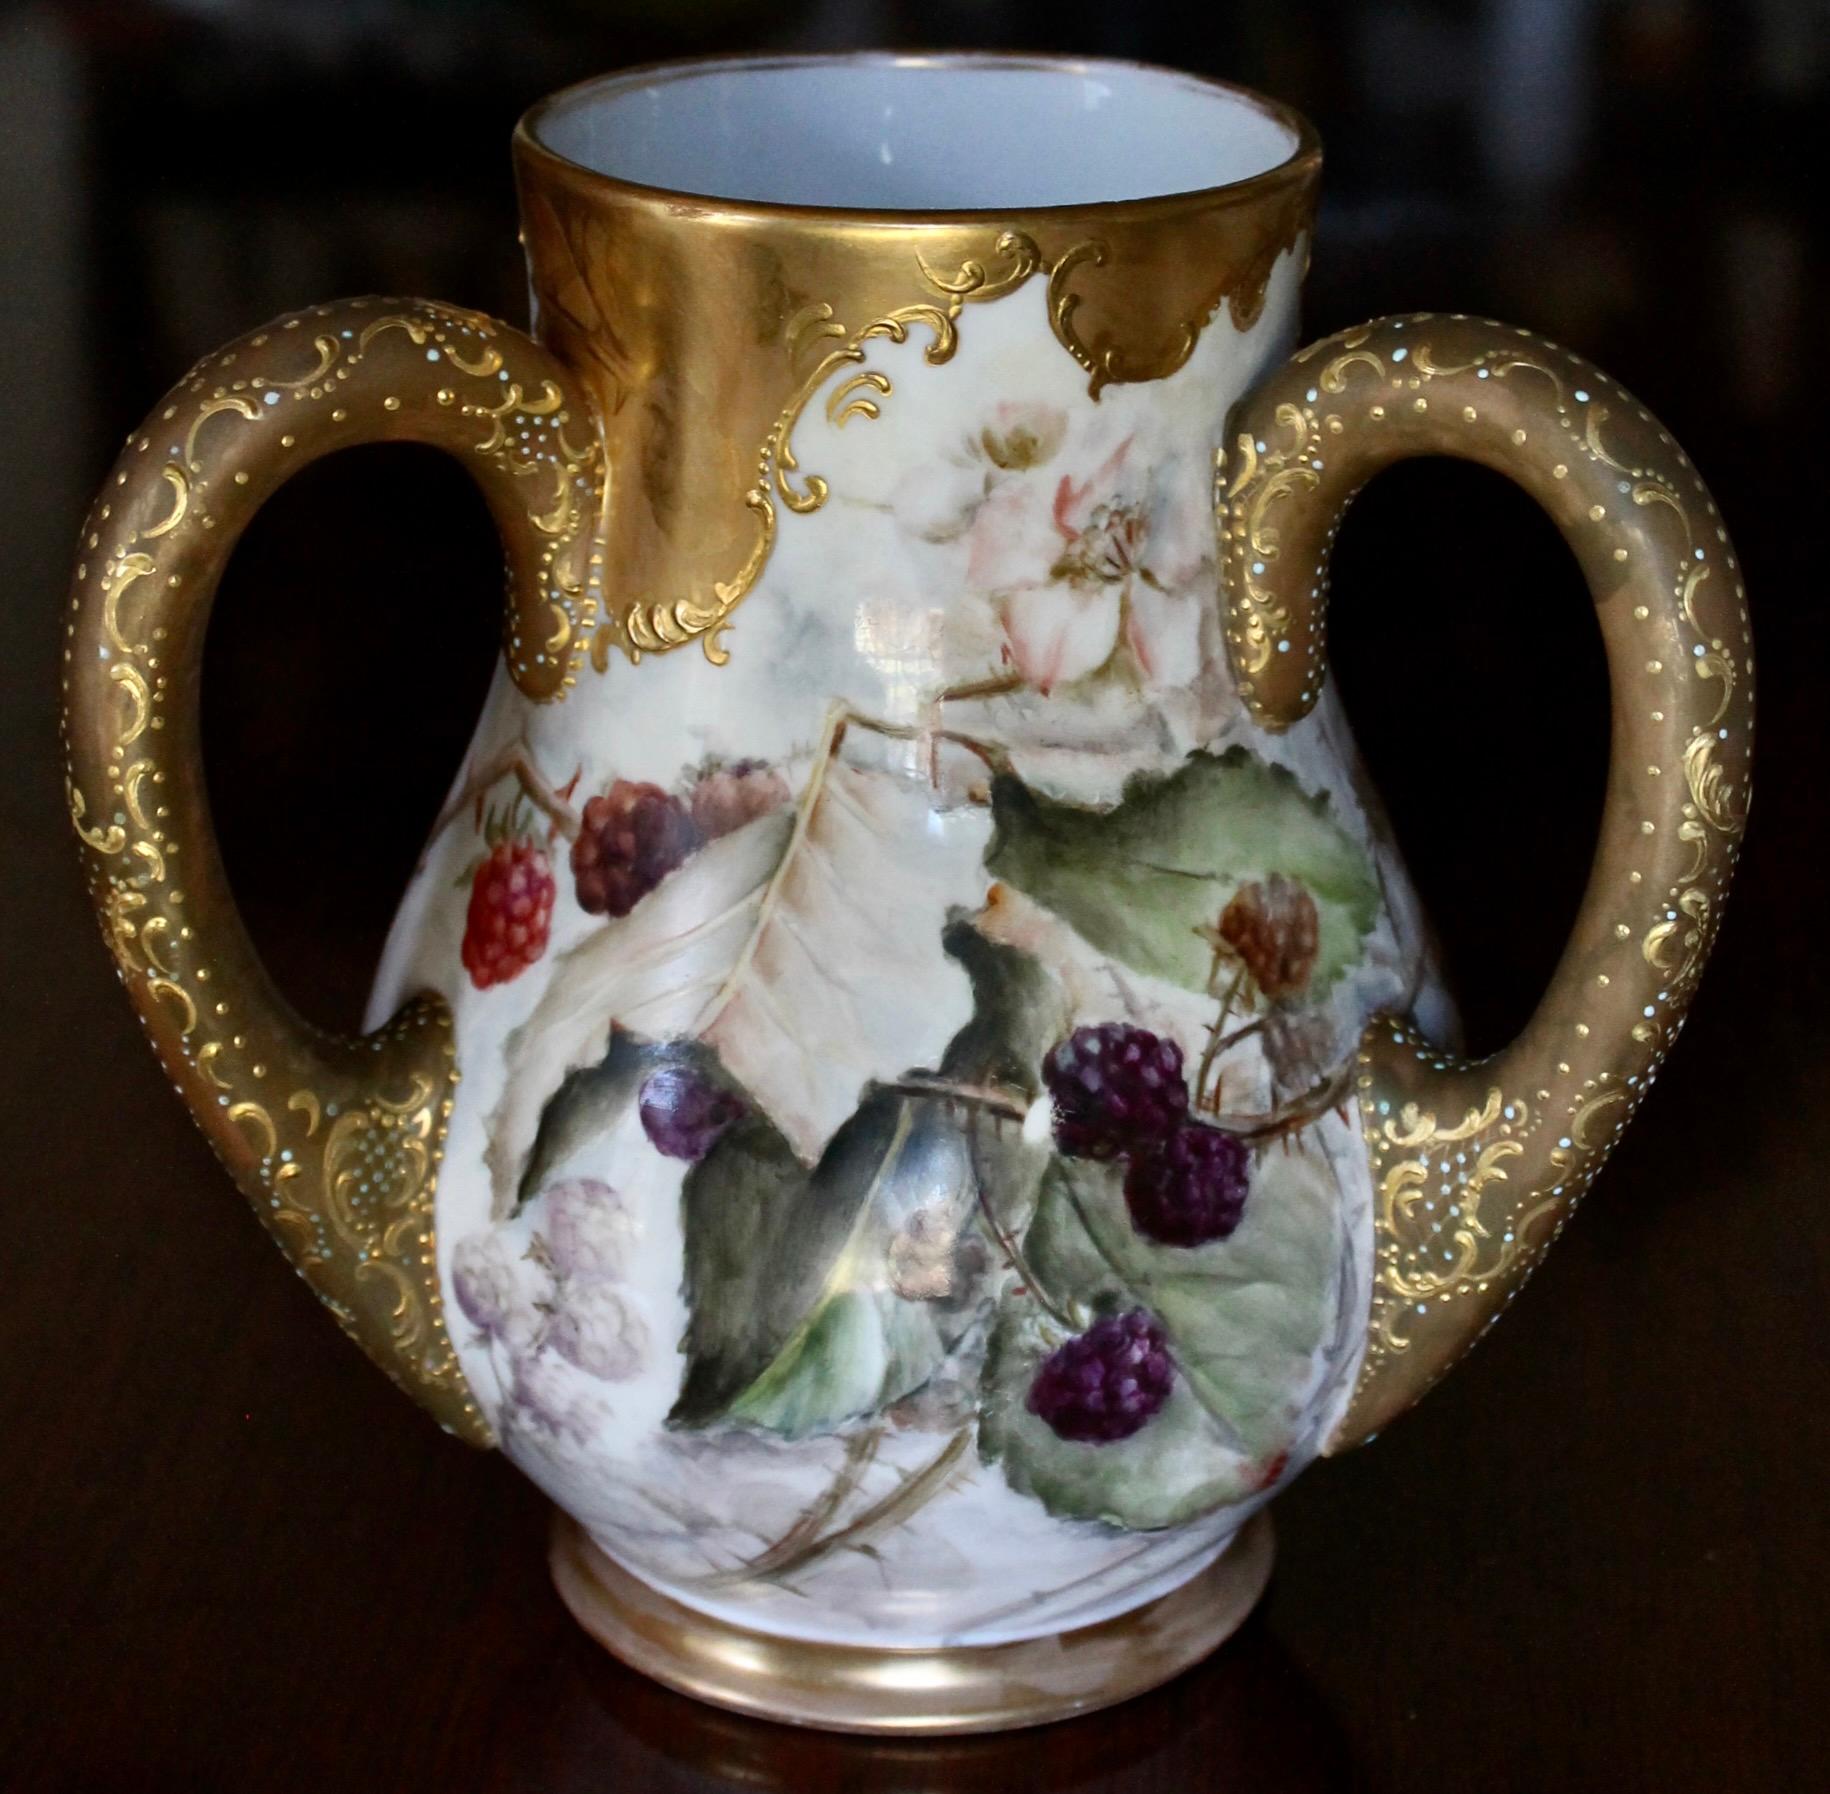 A beautiful American Belleck Ceramic Art Company (CAC) late 19th century porcelain vase-Hand painted Raspberries and gold detailing. Signed.